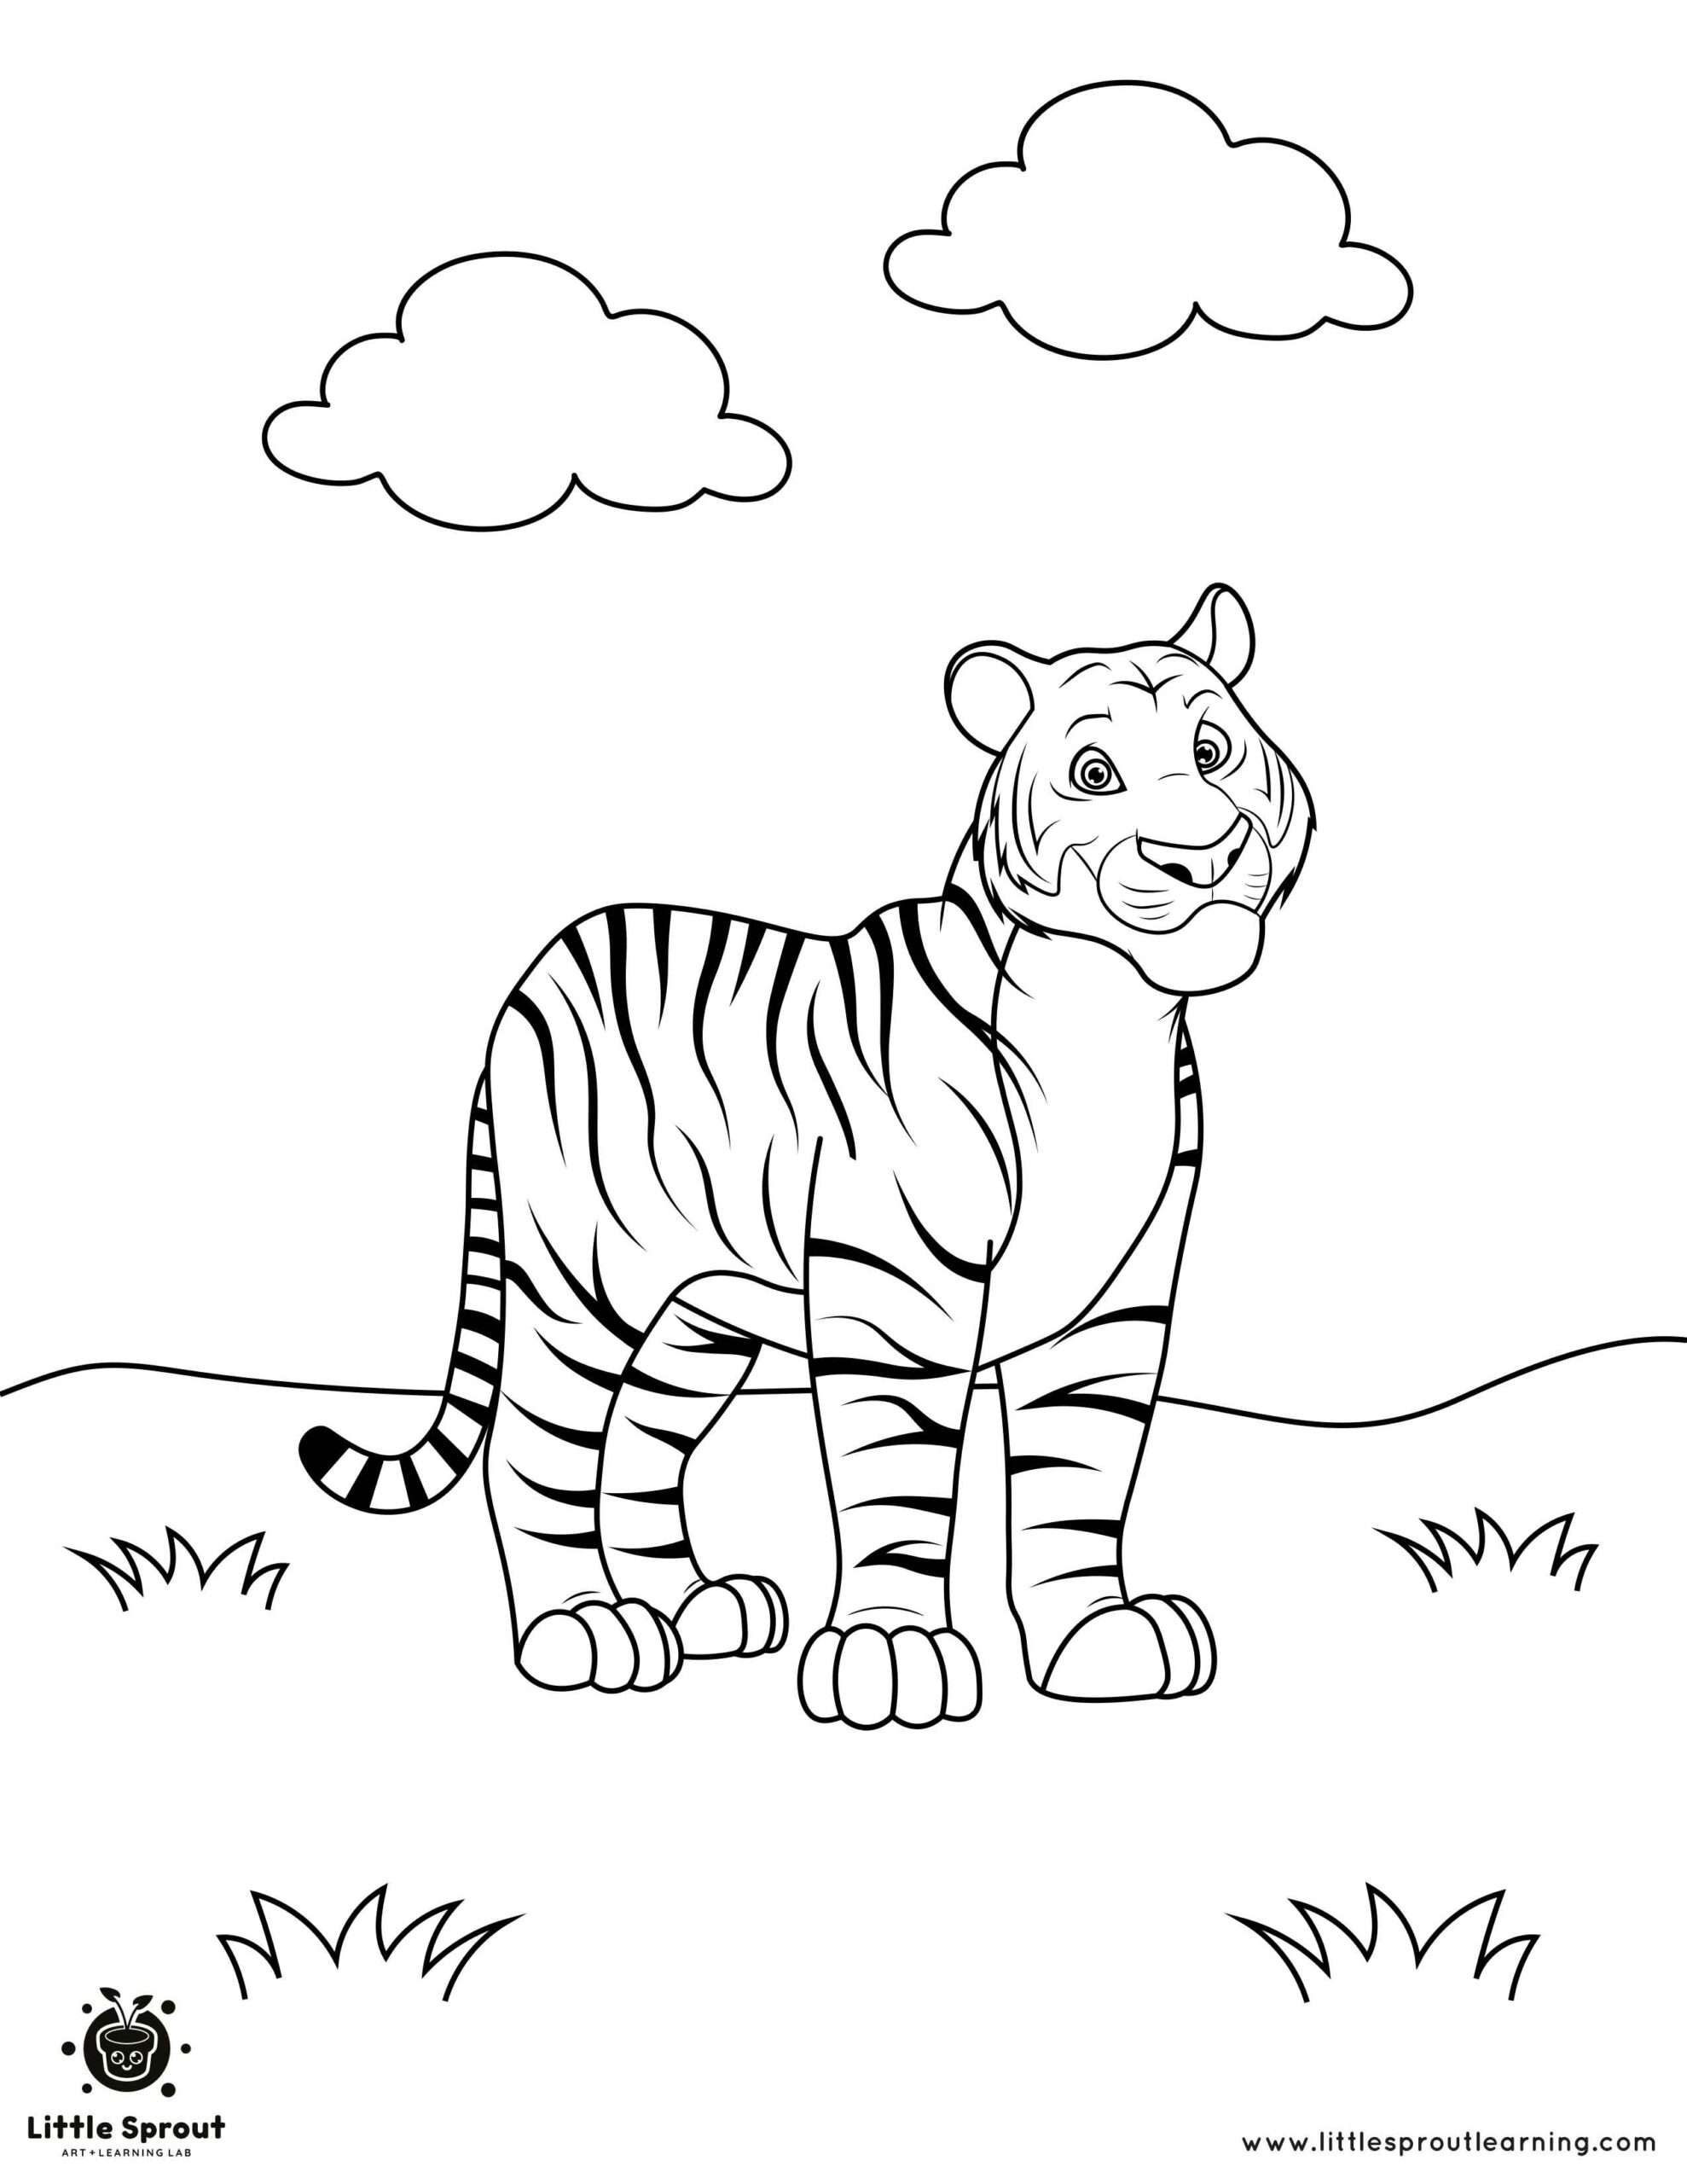 Coloring Page Tiger 1 Little Sprout Learning scaled